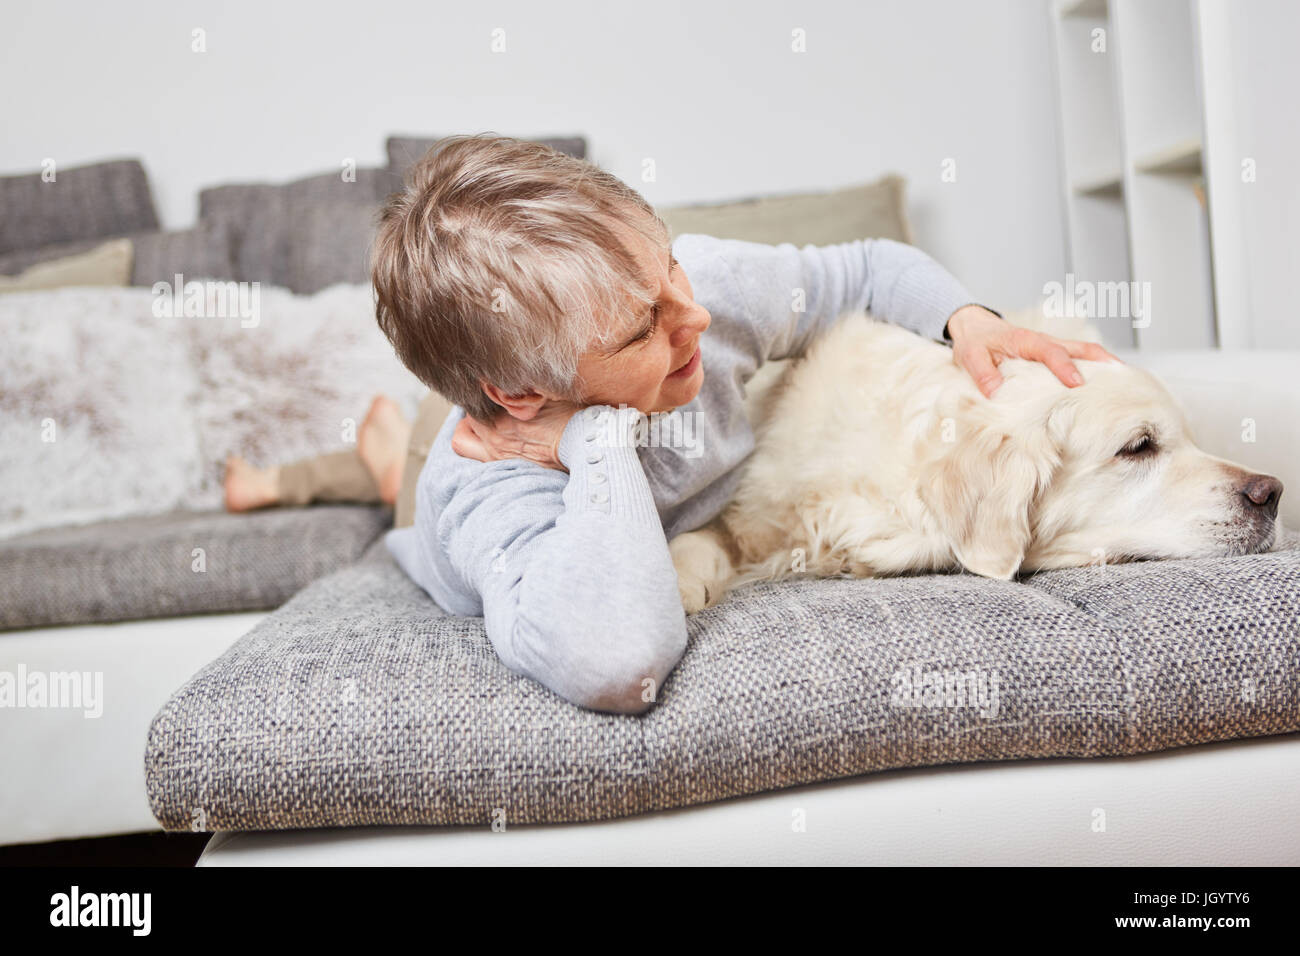 Senior woman with dog Retriever on the couch for relaxation Stock Photo